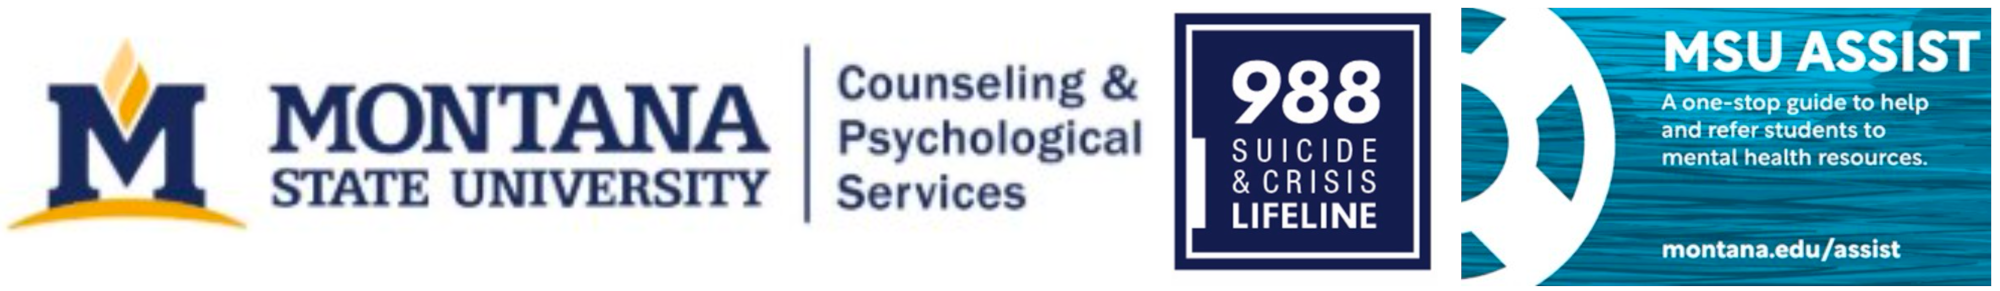 Montana State University. Counseling and Psychological Services. 988 suicide and crisis lifeline. MSU Assist. A one-stop guide to help and refer students to mental health resources. montana.edu/assist